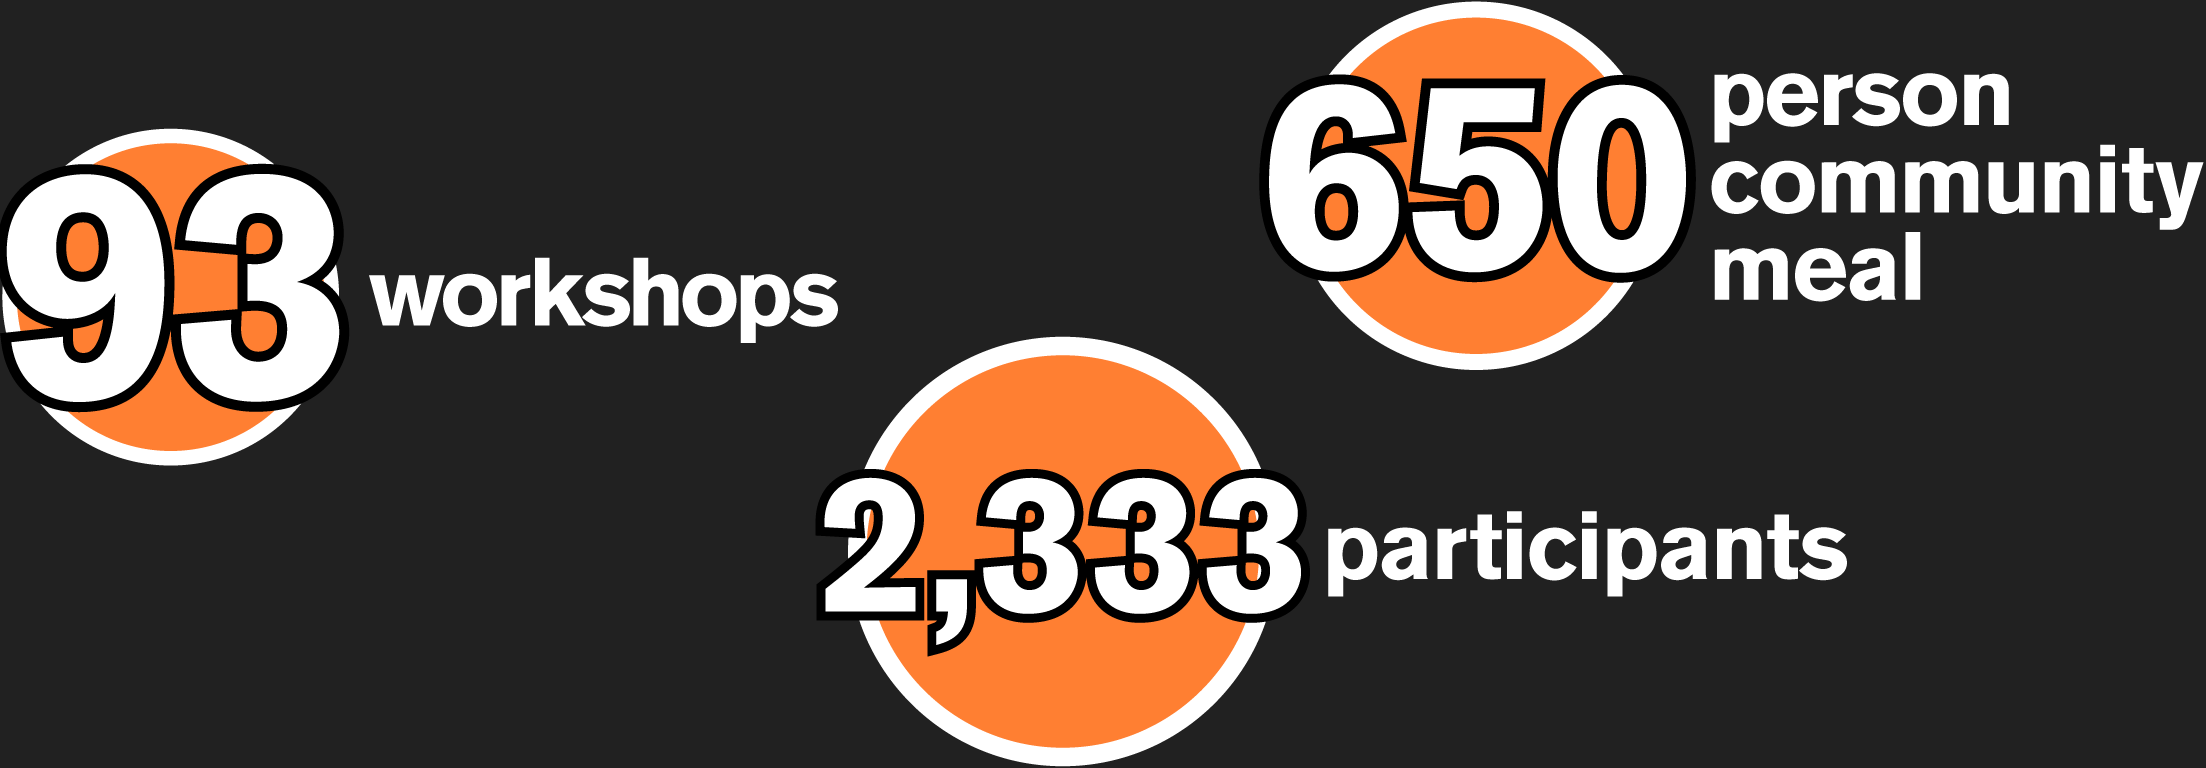 Numbers: 93 workshops, 2333 participants, and 650 person community meal